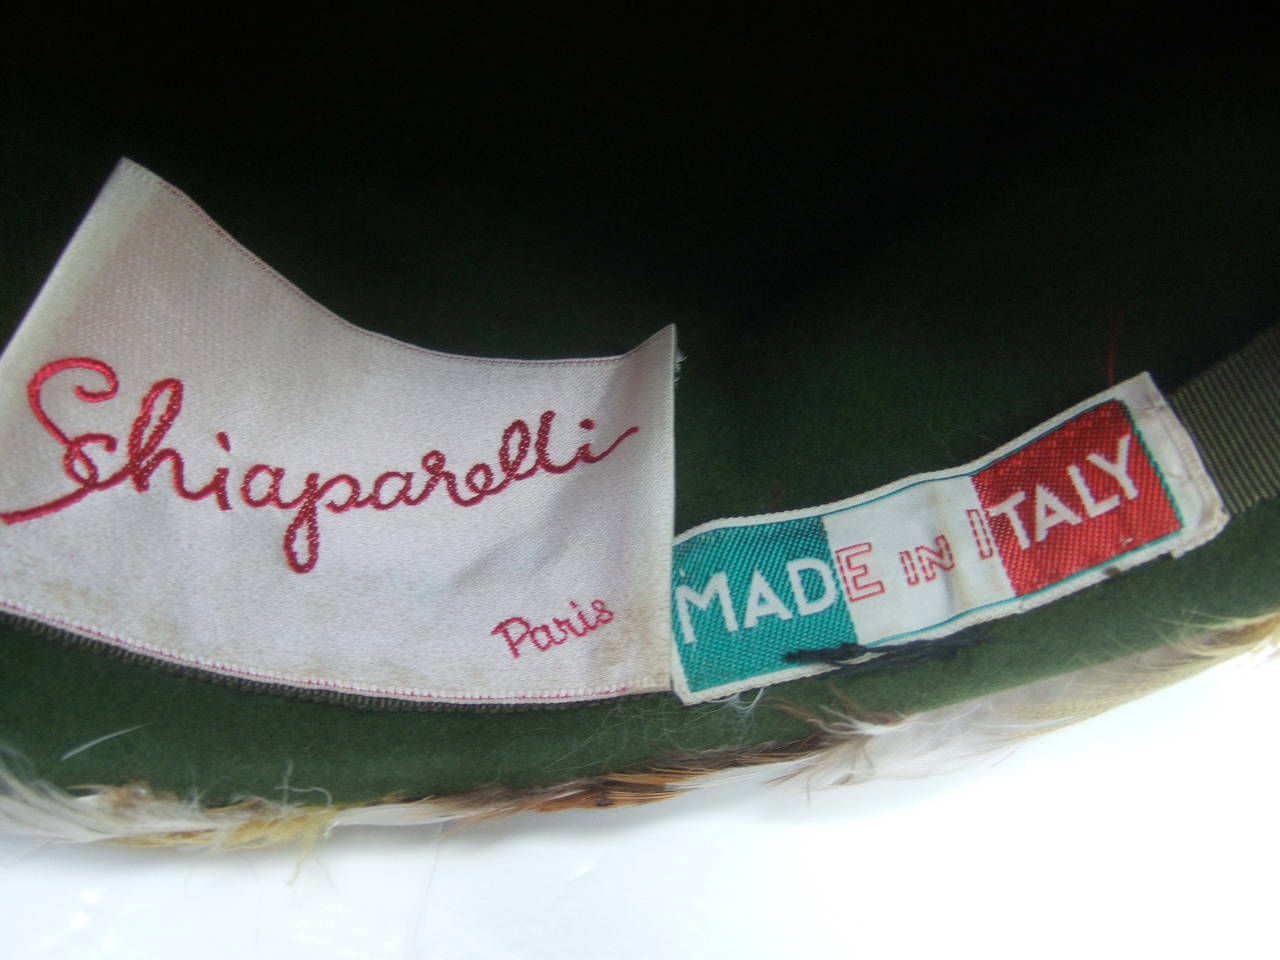 Schiaparelli Exotic Feather Dome Hat Made in Italy c 1950 1